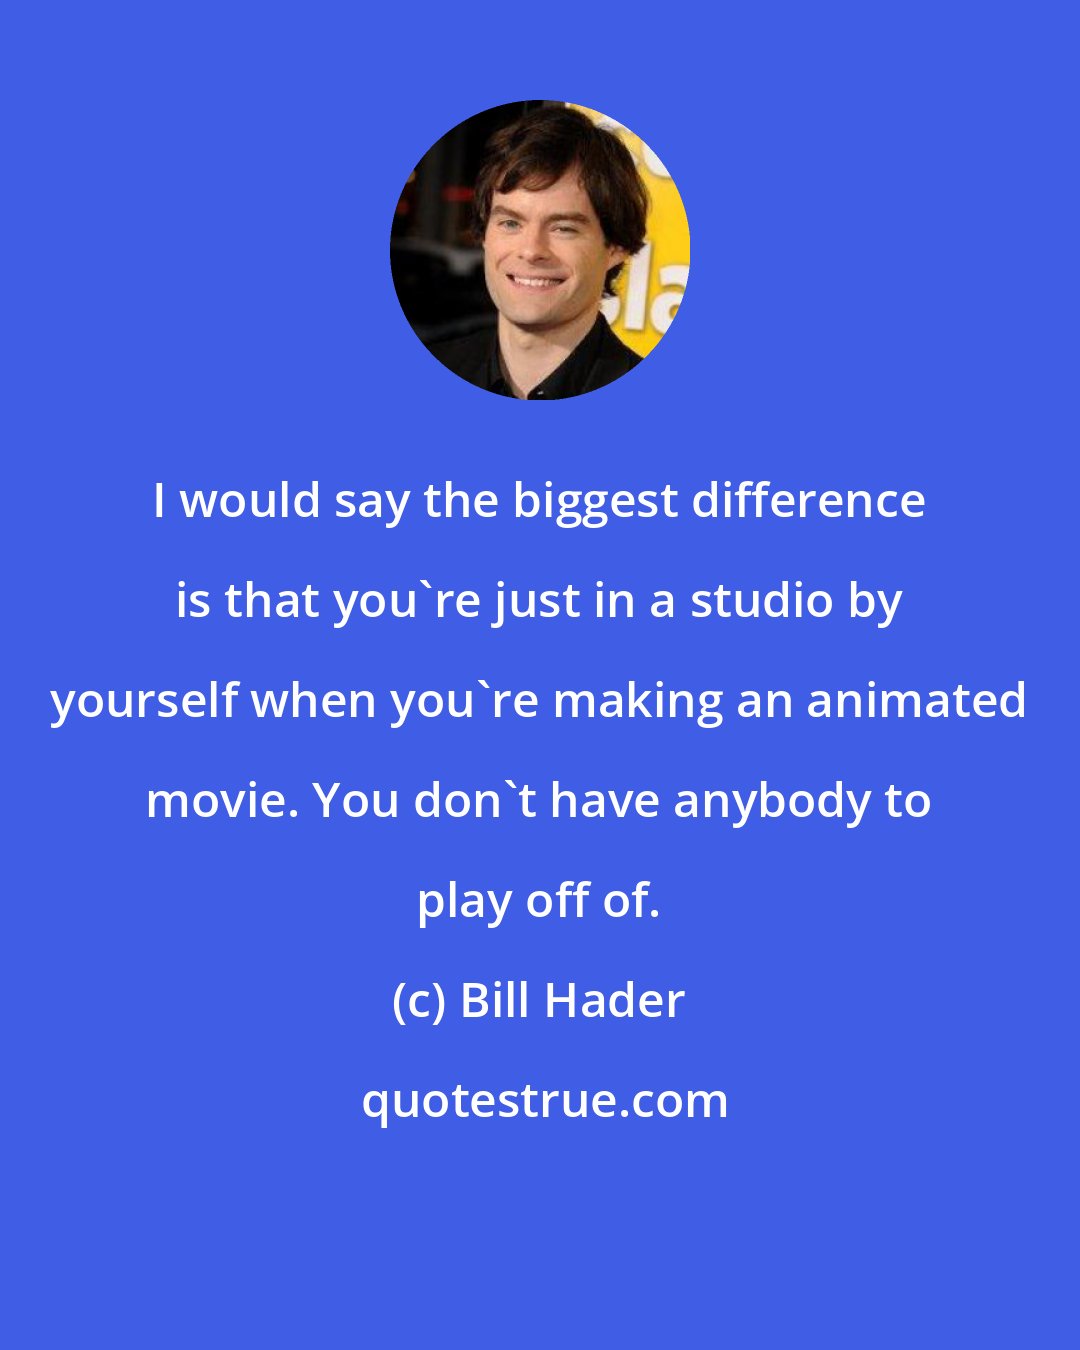 Bill Hader: I would say the biggest difference is that you're just in a studio by yourself when you're making an animated movie. You don't have anybody to play off of.